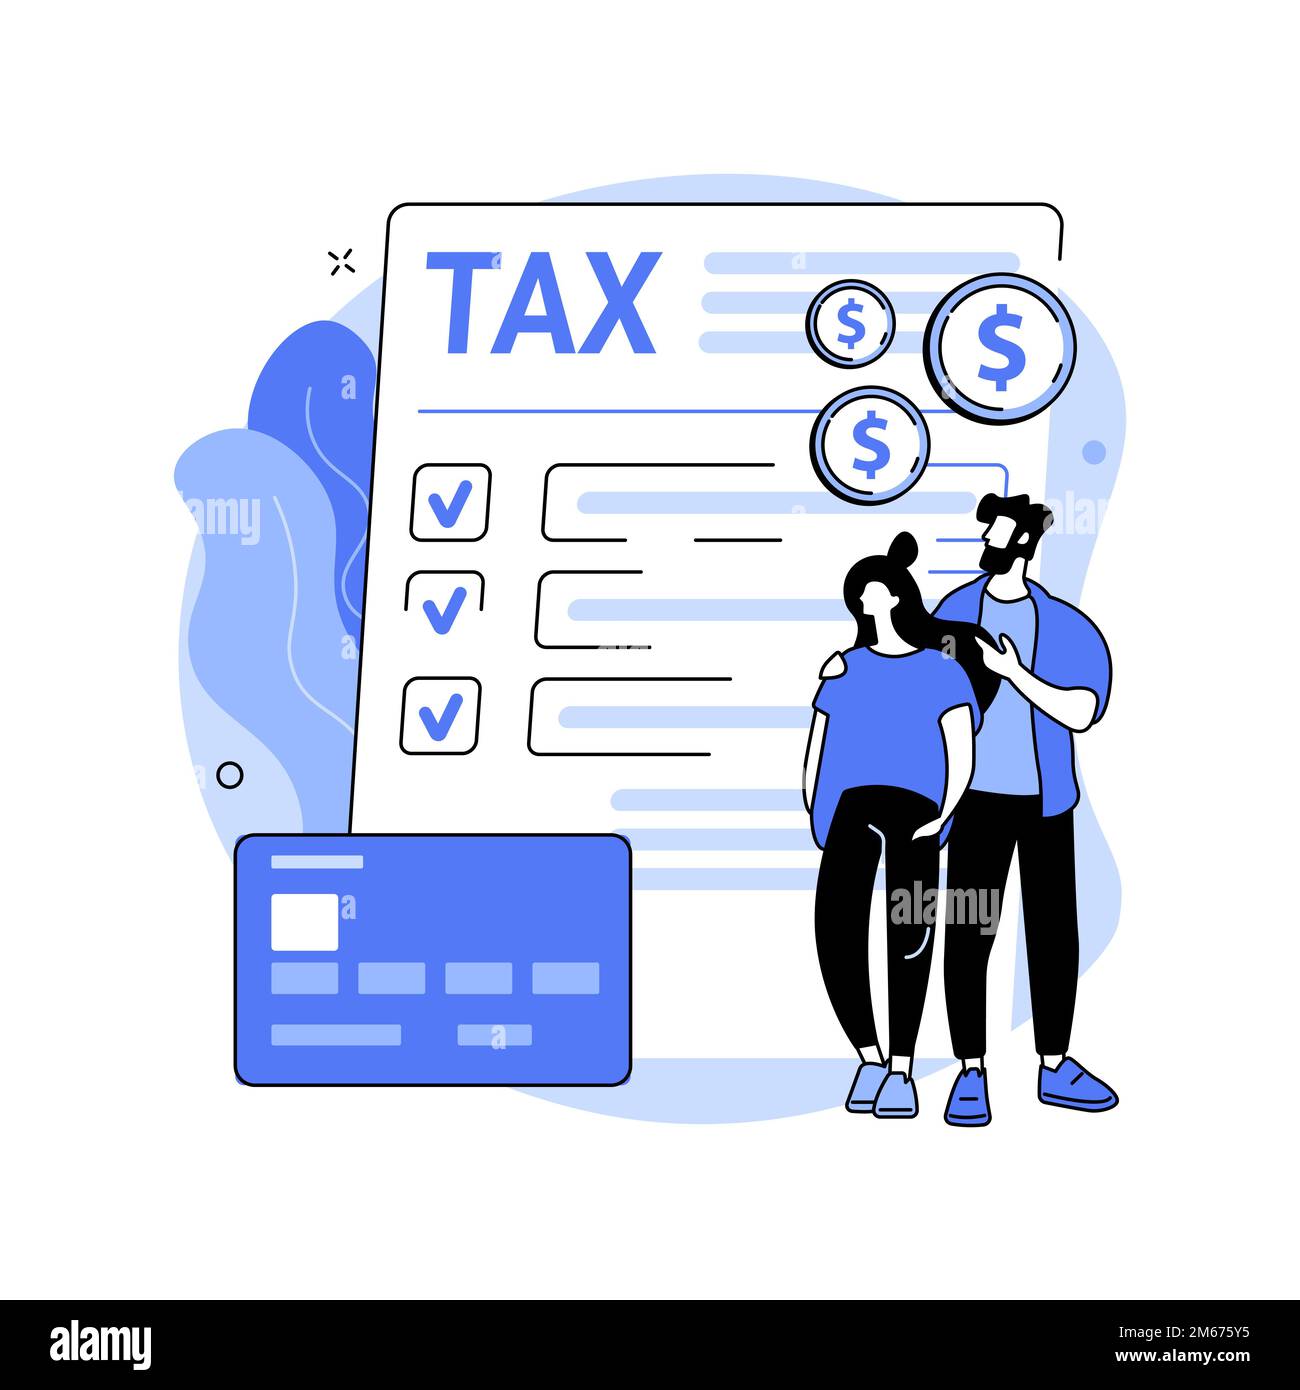 Personal income tax abstract concept vector illustration. Budget calculation, online IRS form, bank account, bill payment, receiving invoice, economic Stock Vector